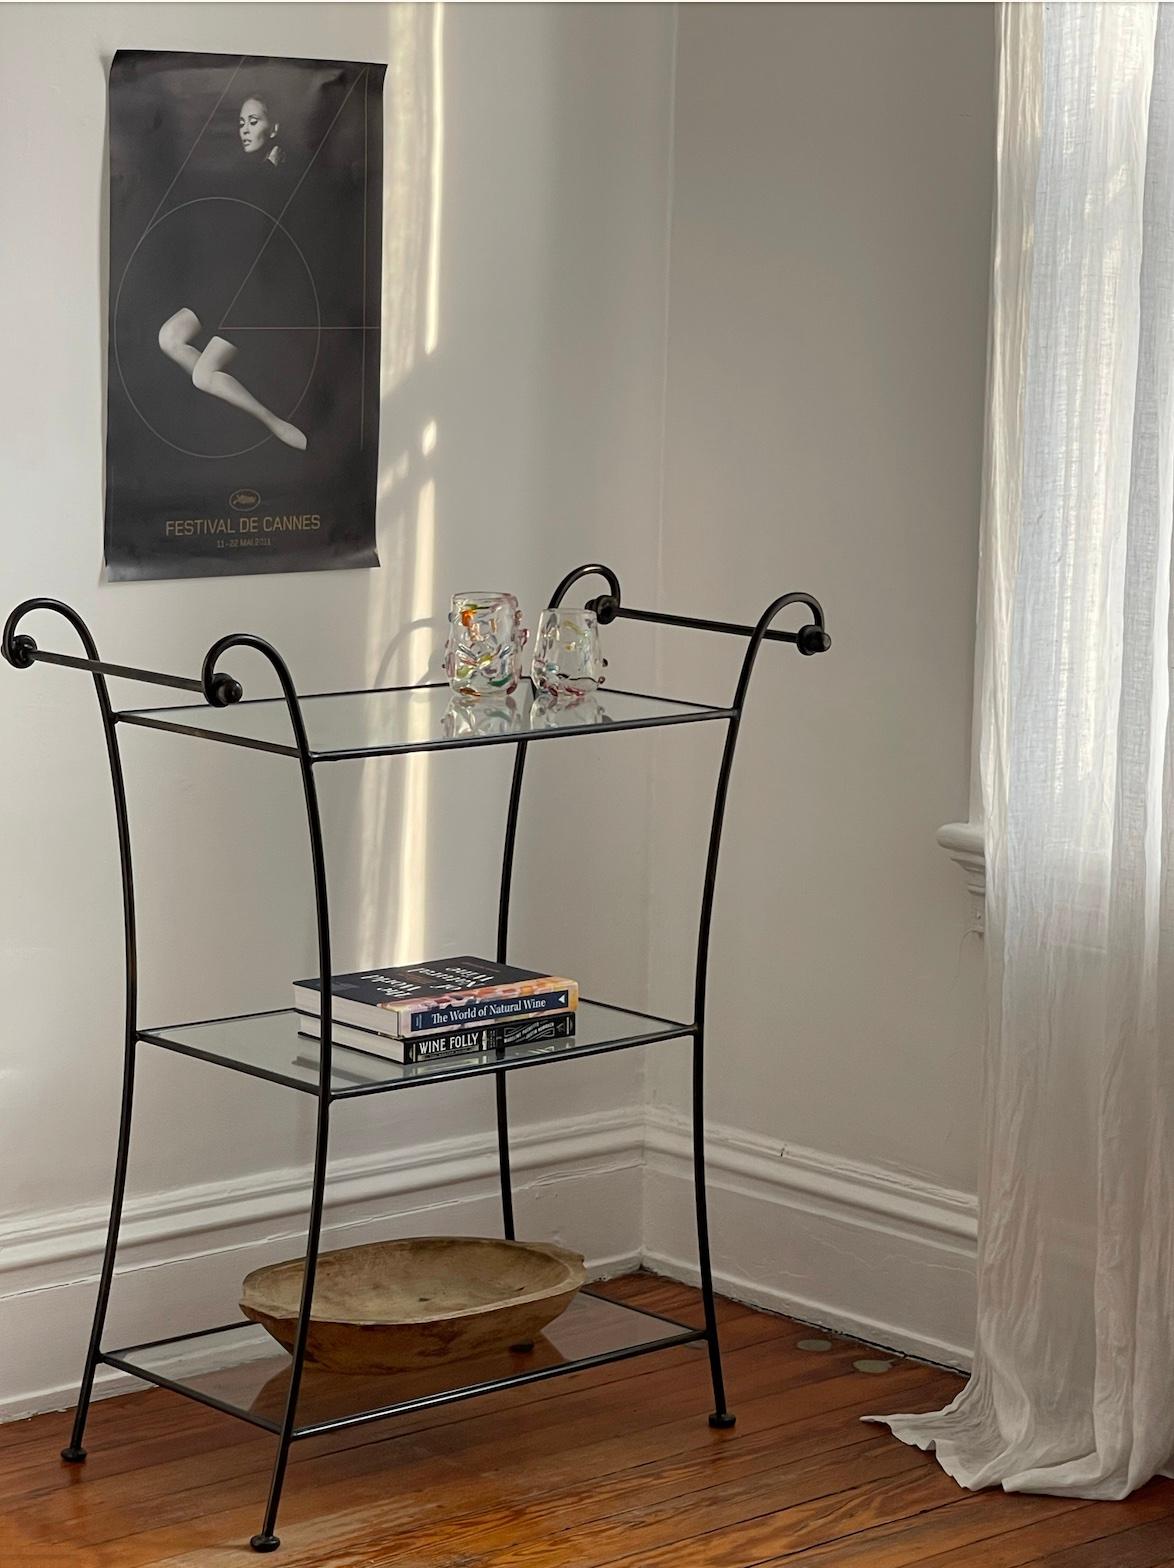 Elegant bar cart in the art deco style with wrought iron frame and three glass tiers. Perfect for serving drinks at Apéro hour. A versatile, timeless piece.